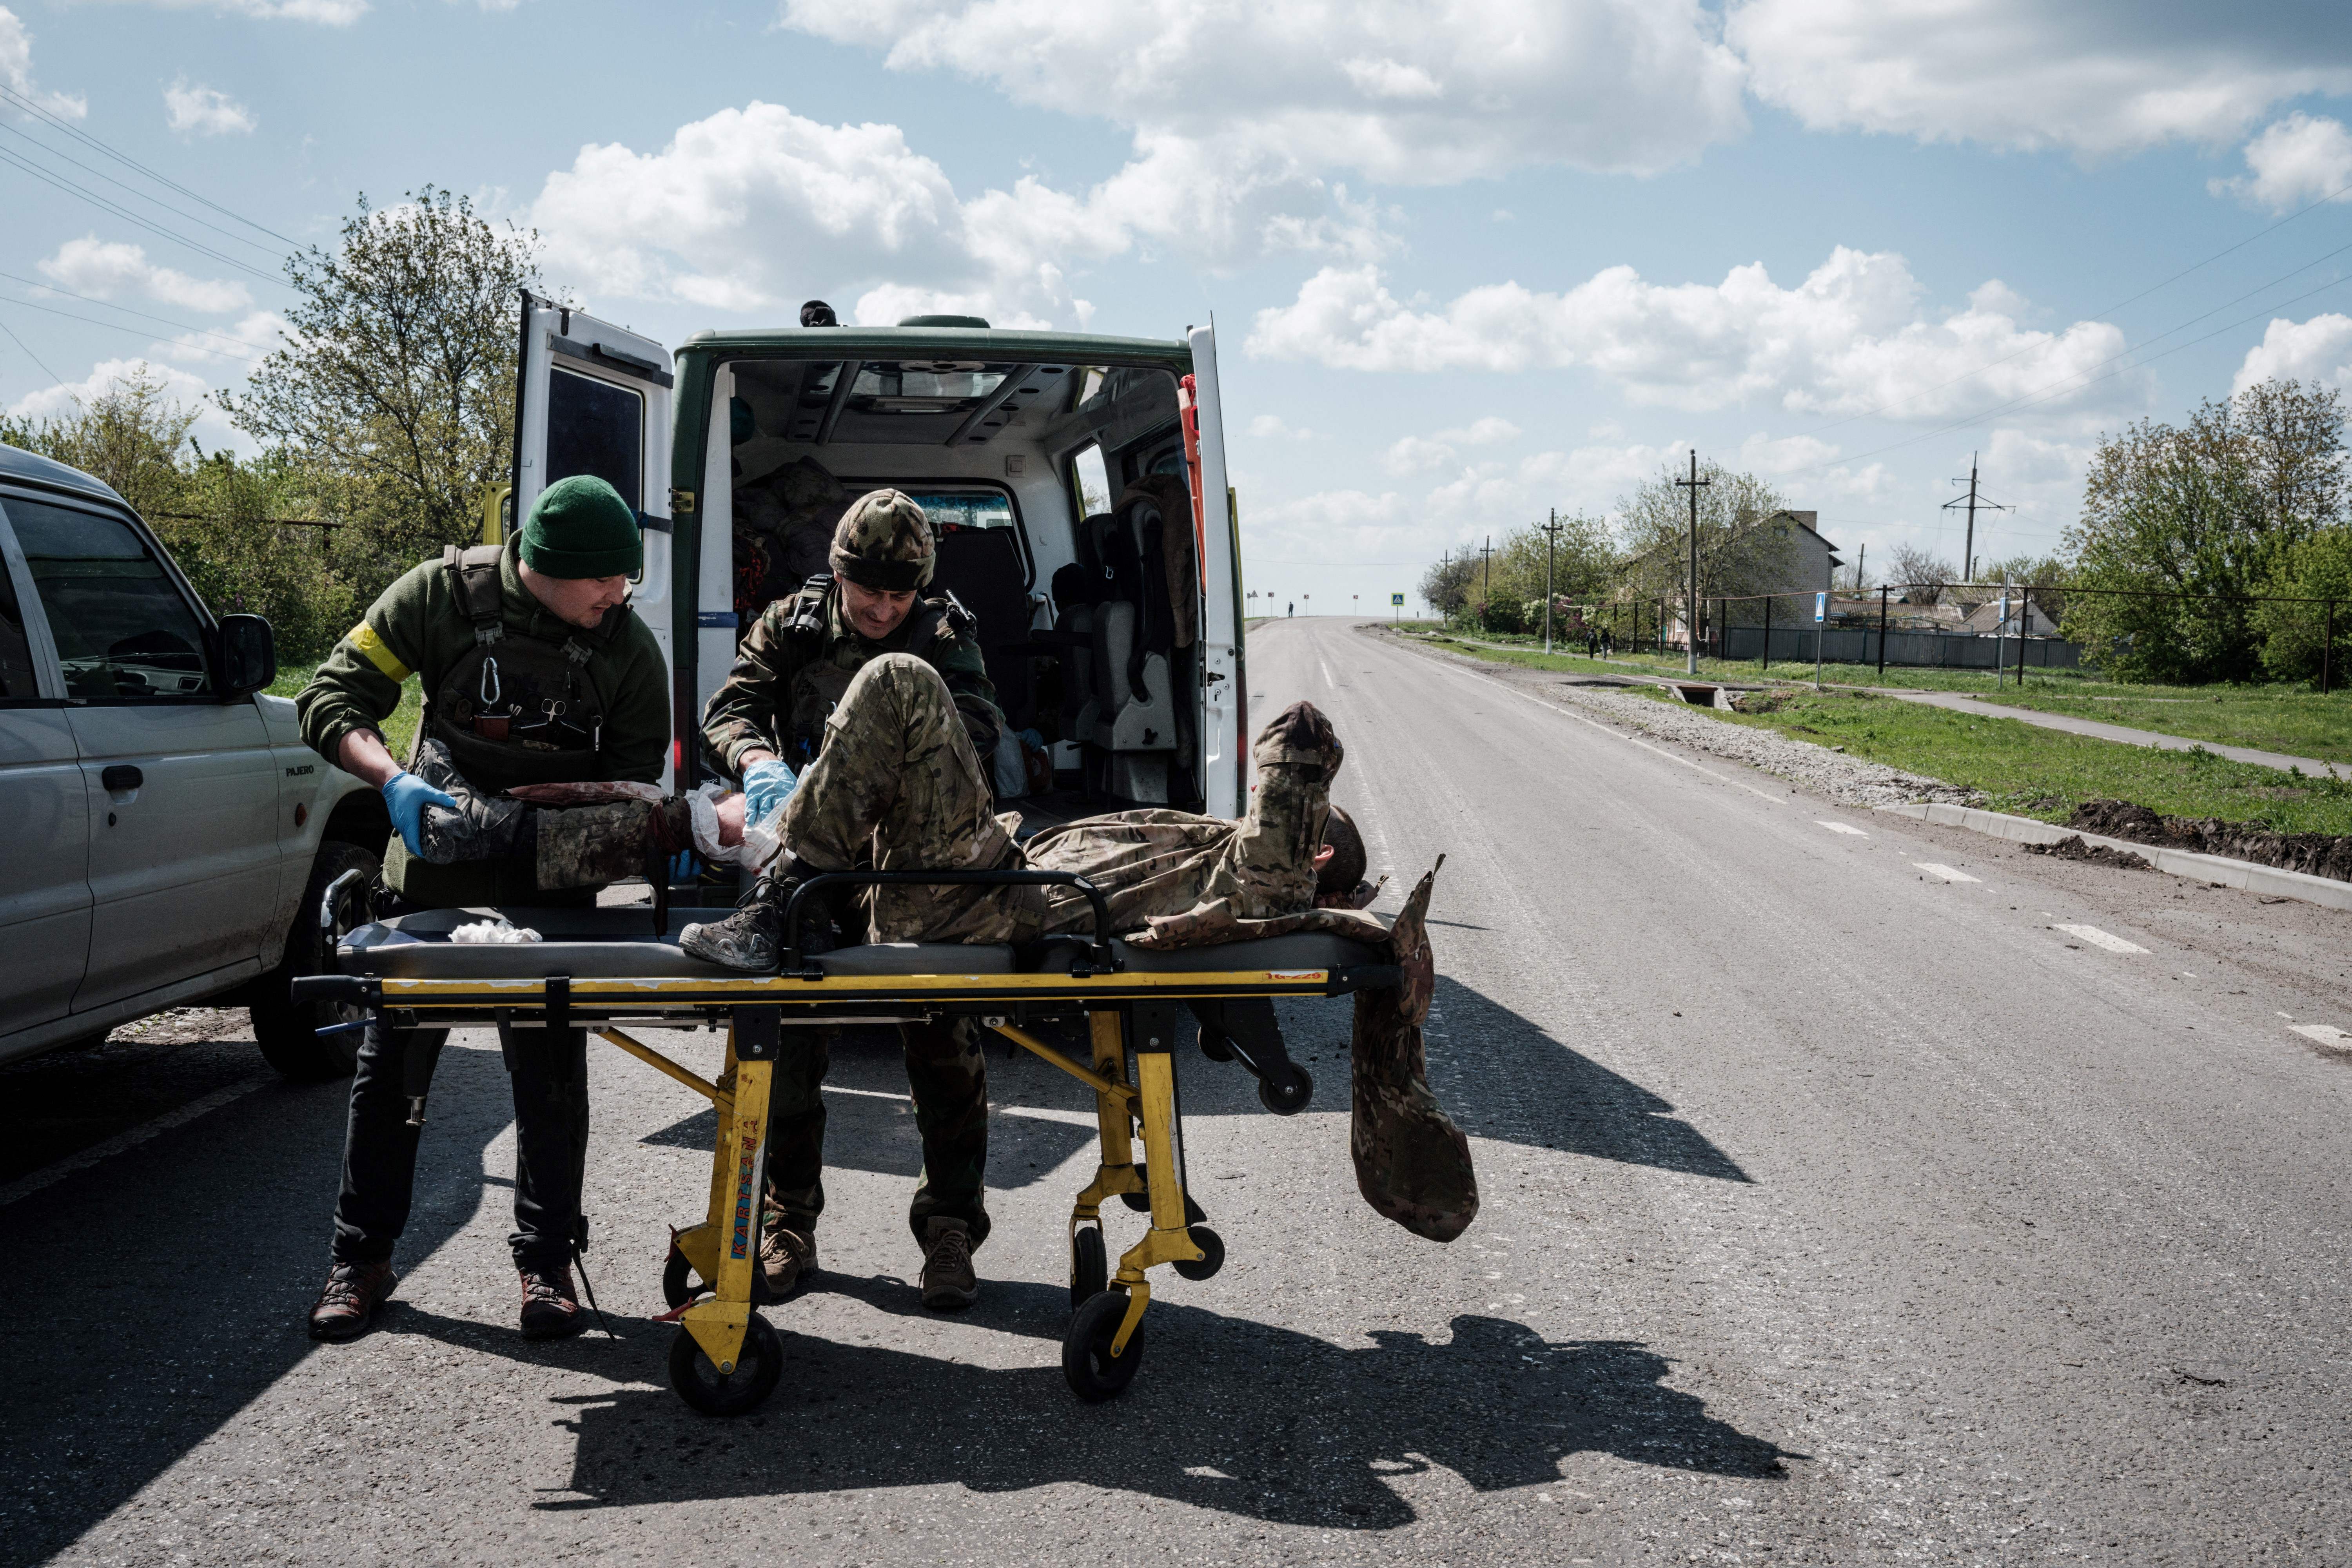 Members of the Ukrainian Army's mobile evacuation unit treat a soldier wounded on the frontline before his transfer to a hospital by ambulance, near Lysychansk, on May 10.